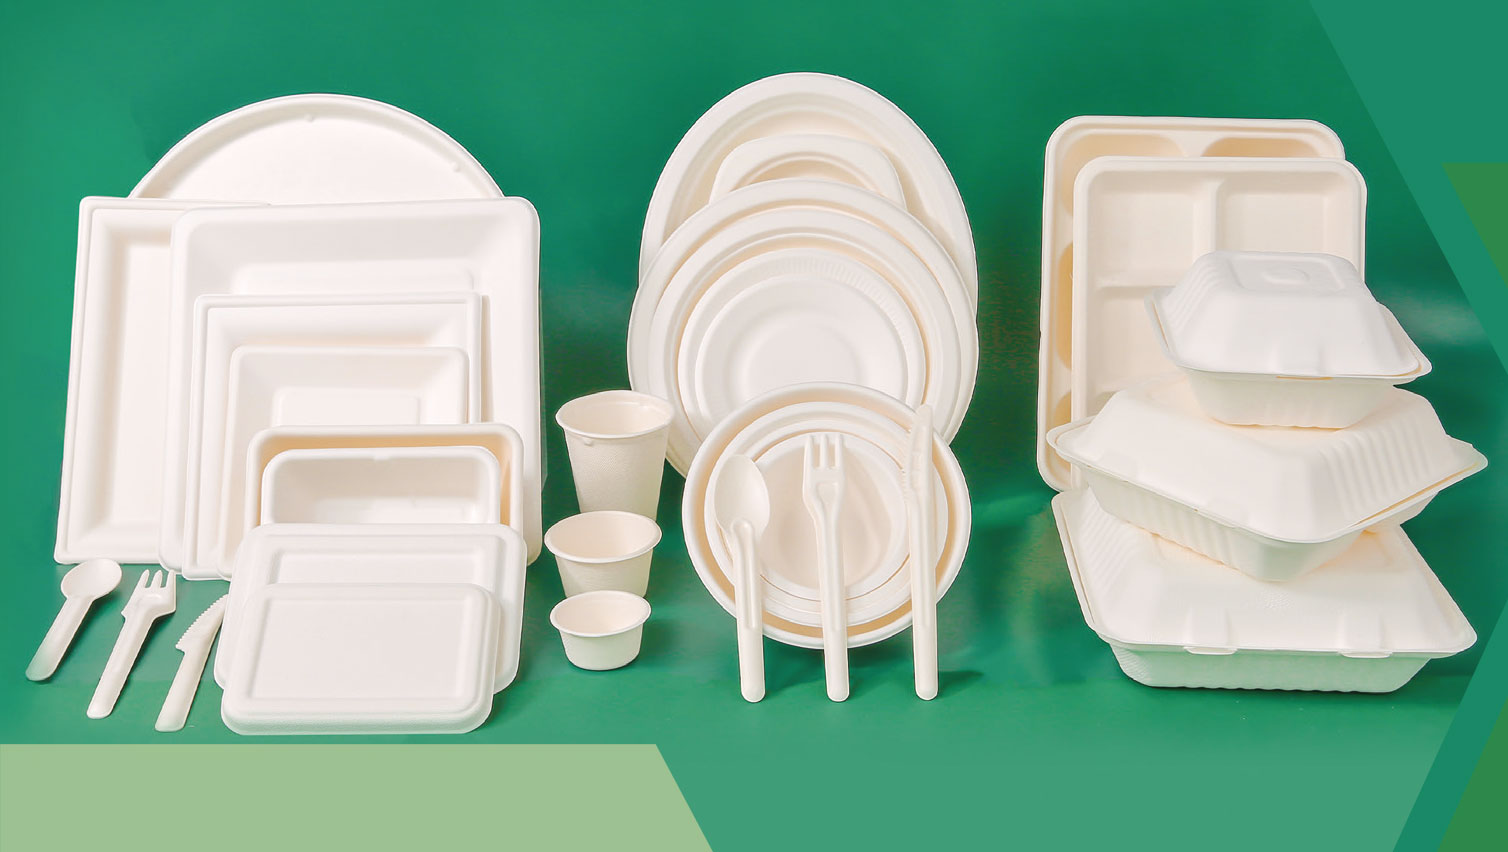 Biodegradable lunch box